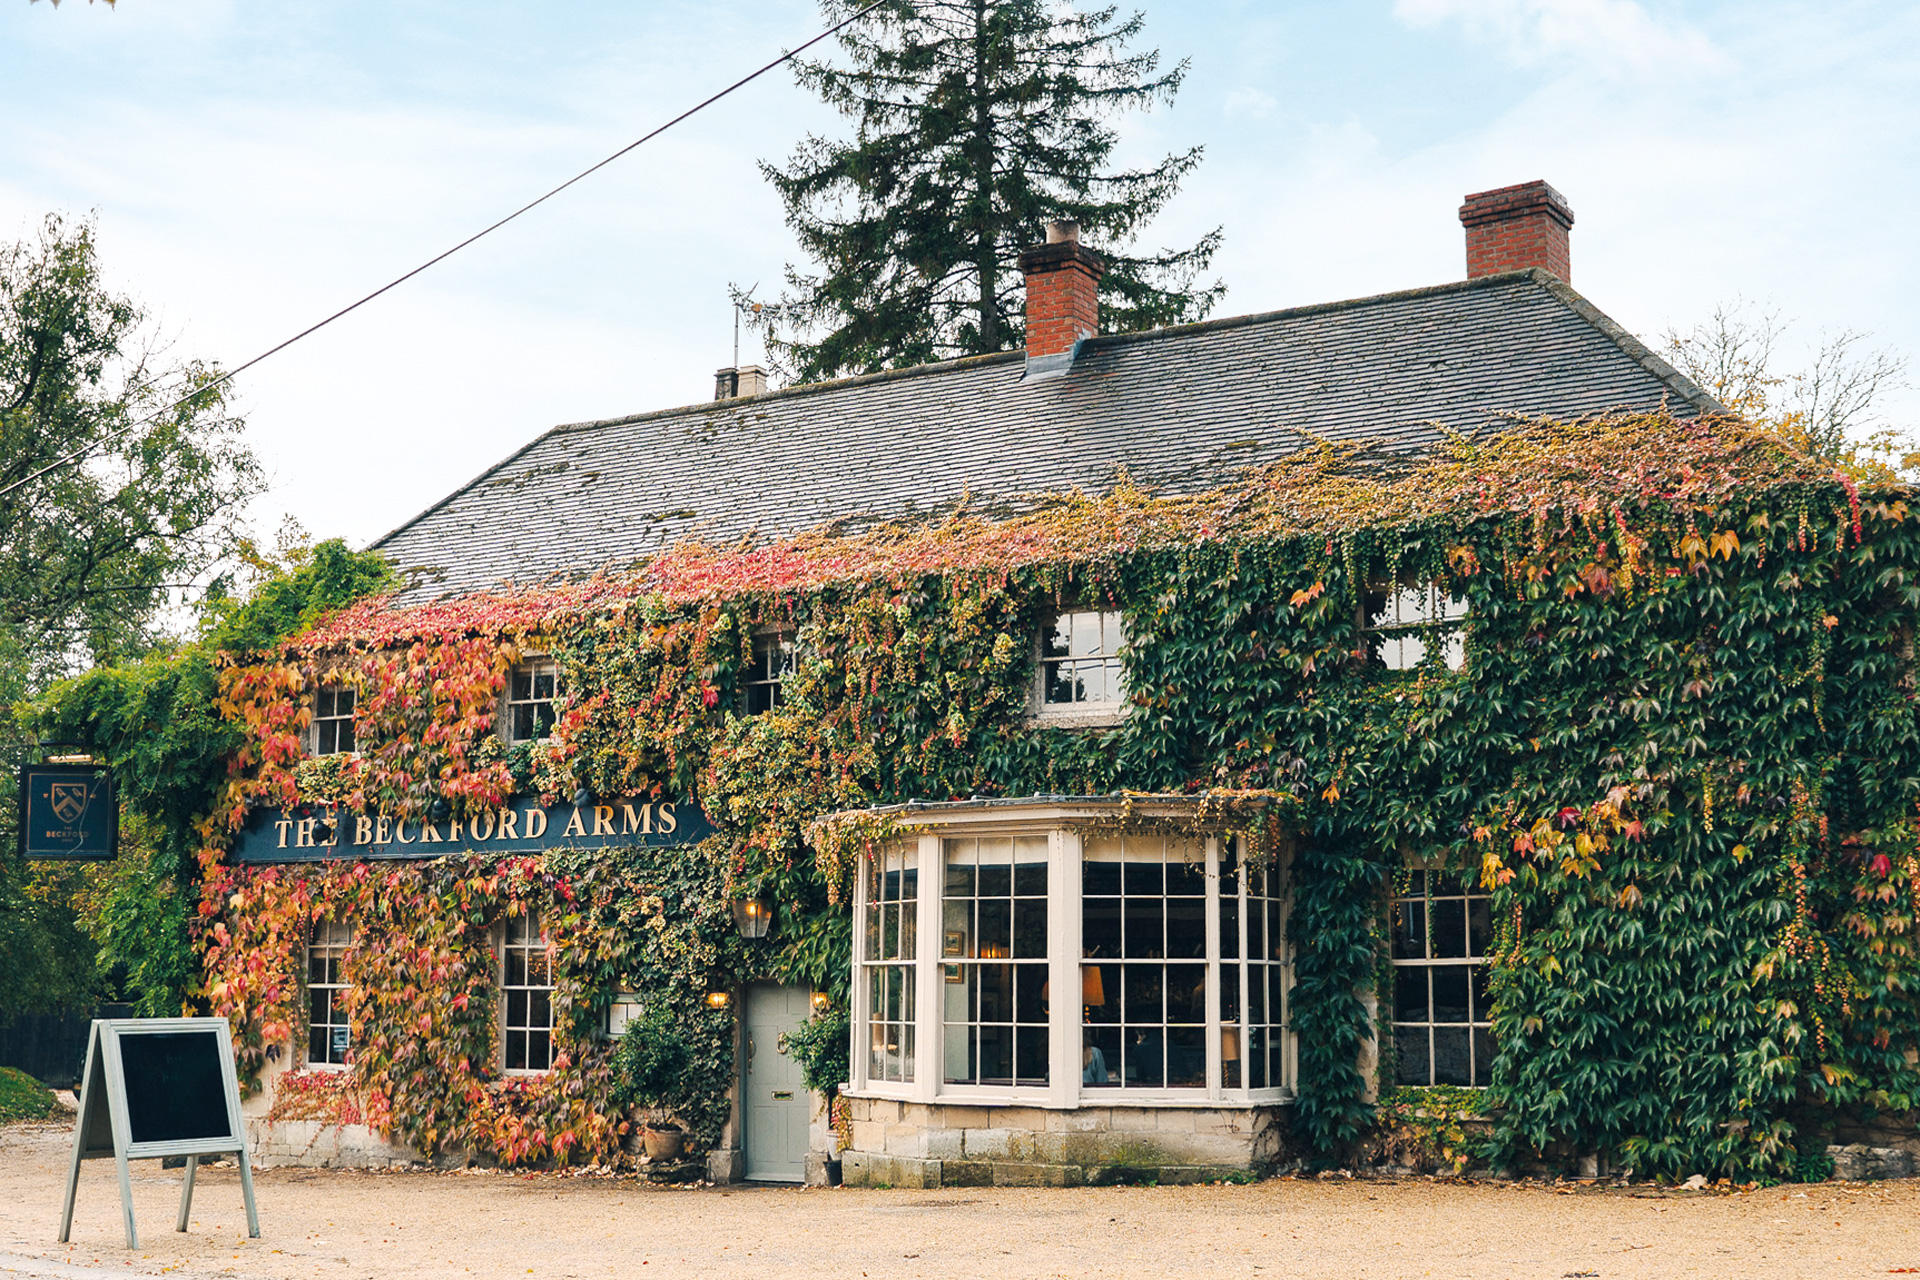 The Beckford Arms – Fonthill Gifford, Wiltshire